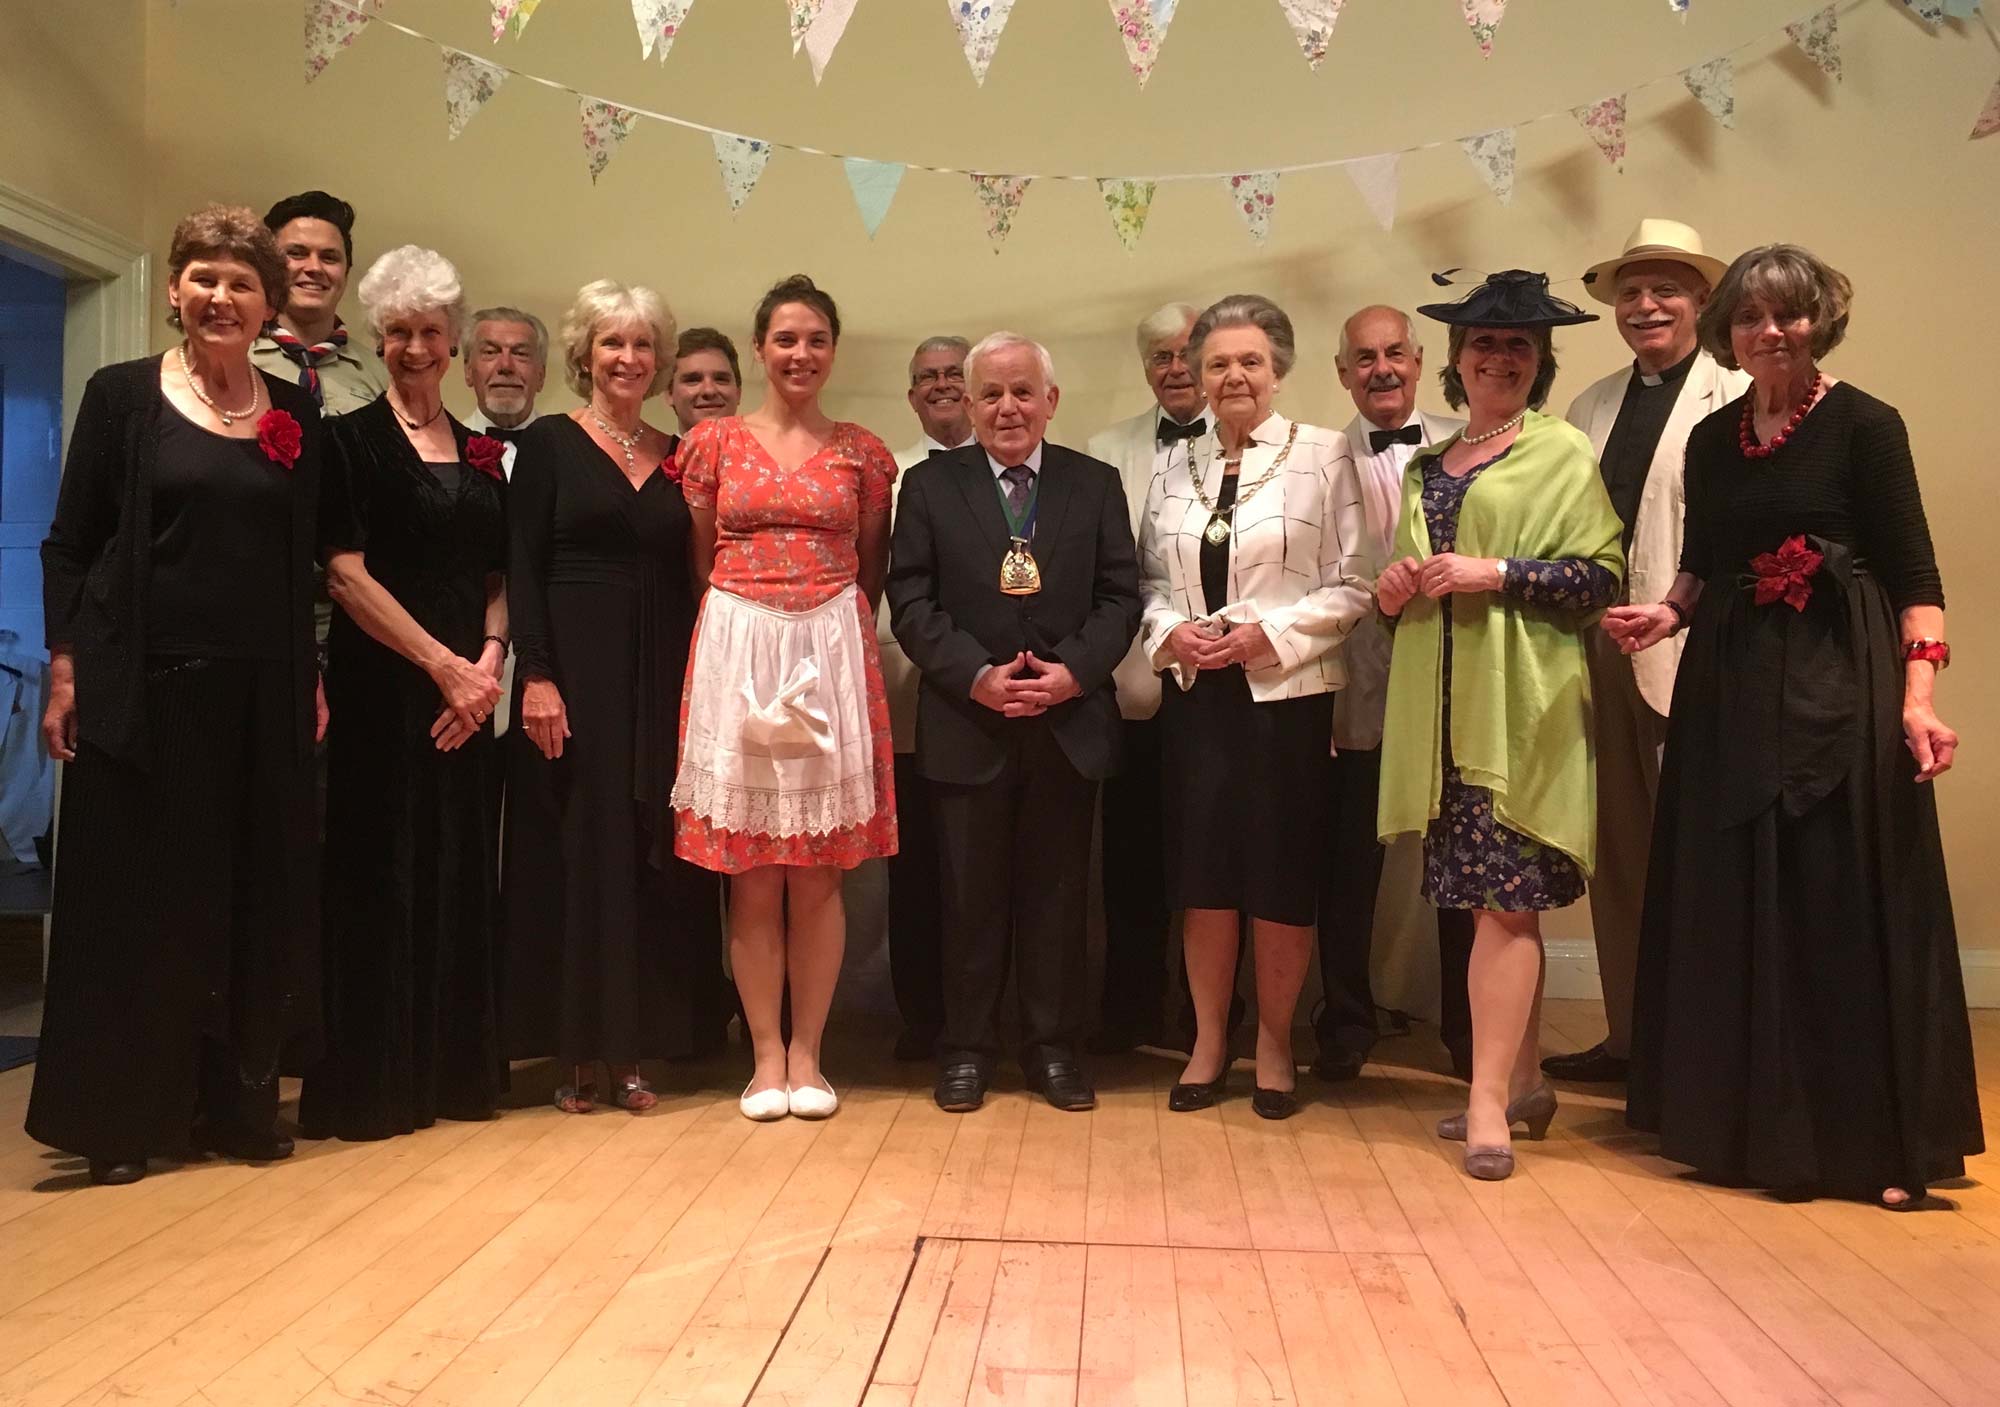 Cllr Jim Clark, centre, joins cast members of Harrogate Dramatic Society’s Let Us Entertain You on stage at Spofforth Long Memorial Hall